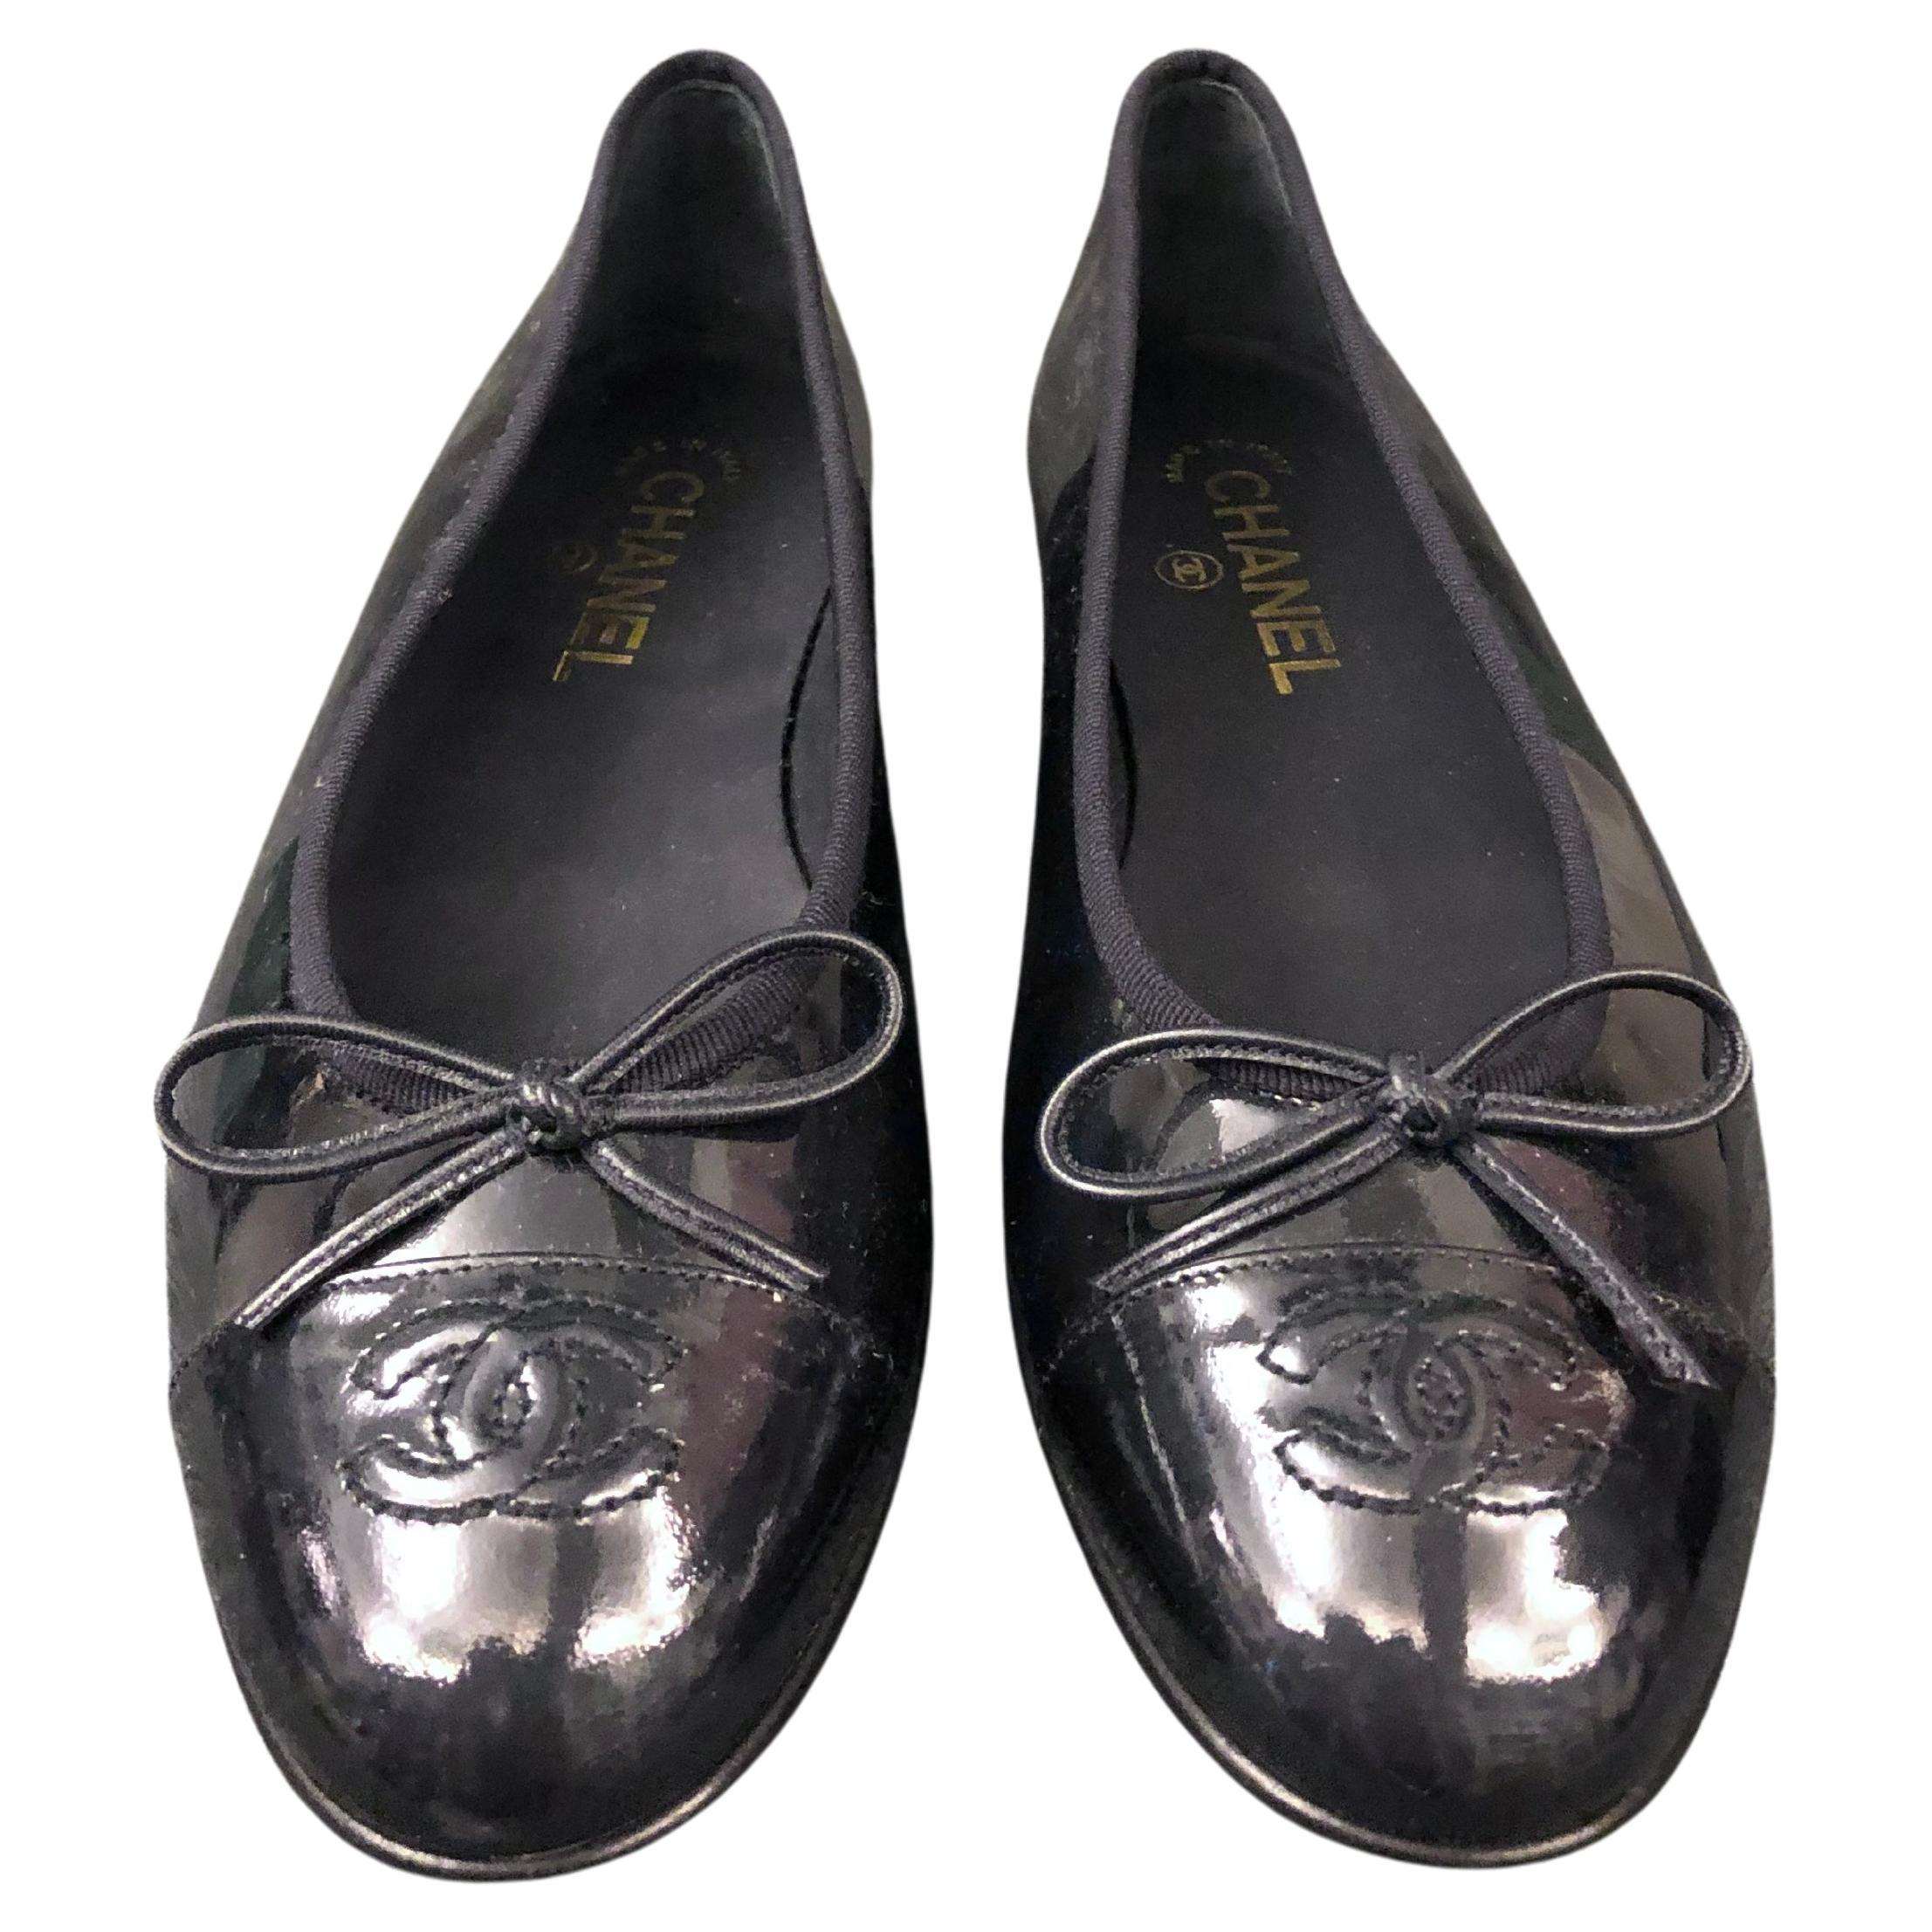  Chanel CC Ballerina Flats in Navy Patent Leather   For Sale